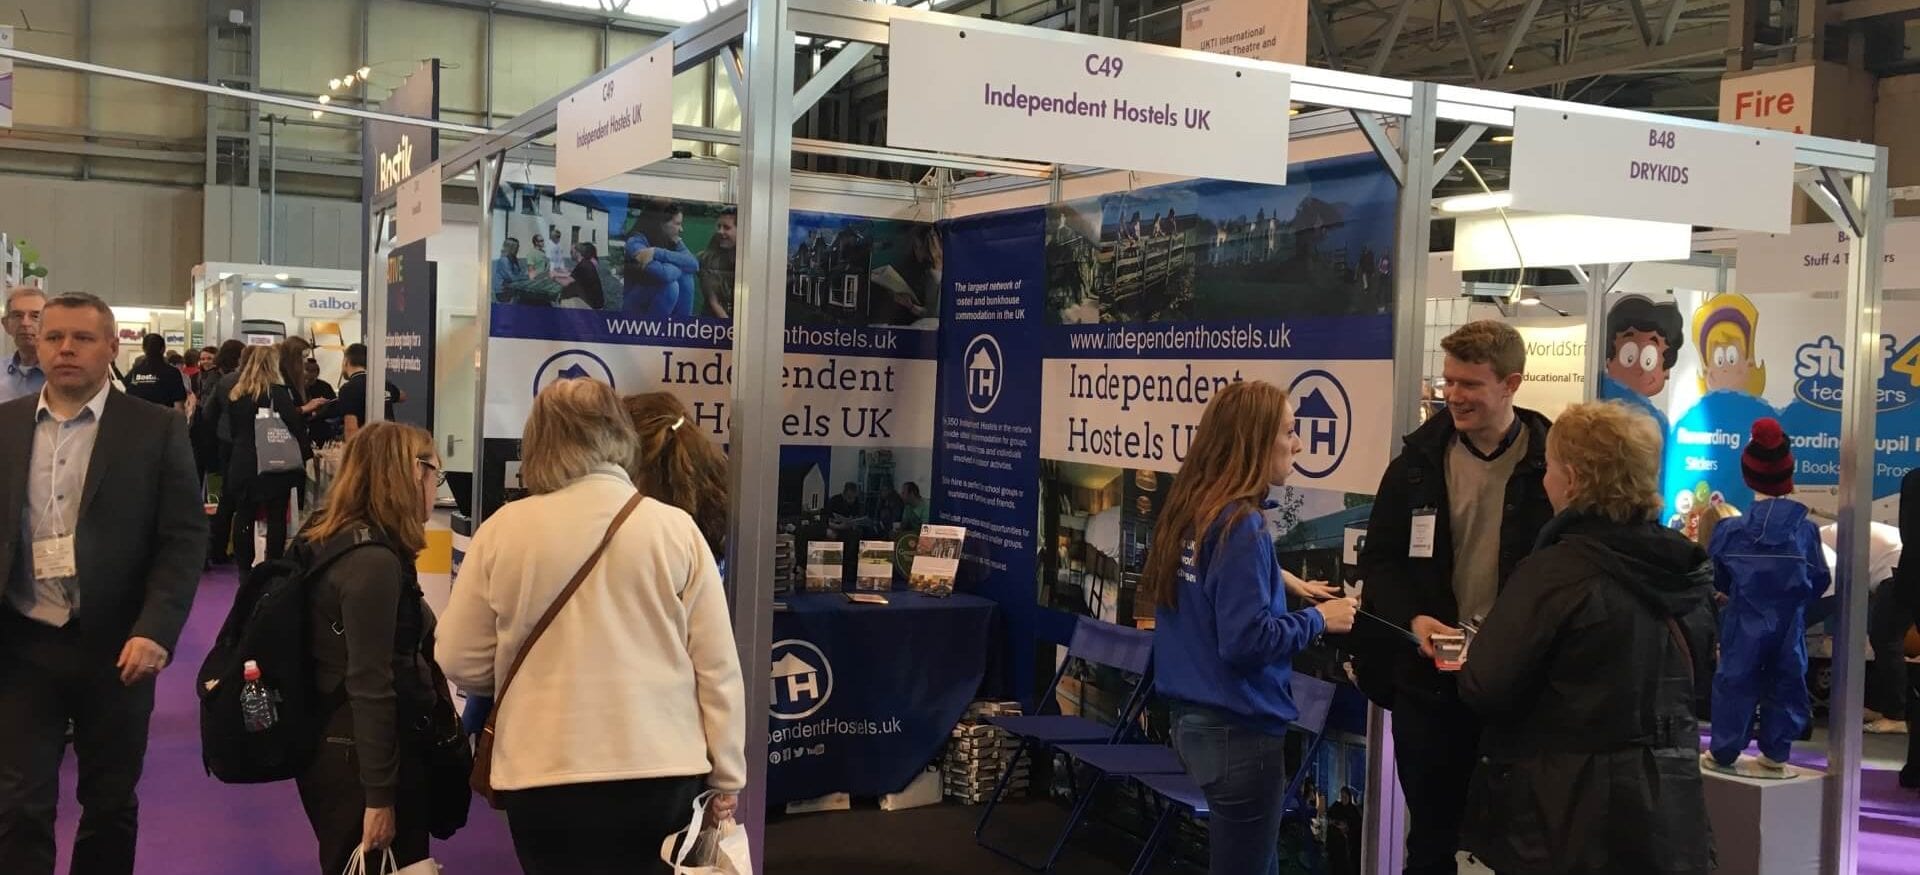 Independent Hostels stand at the Education Show